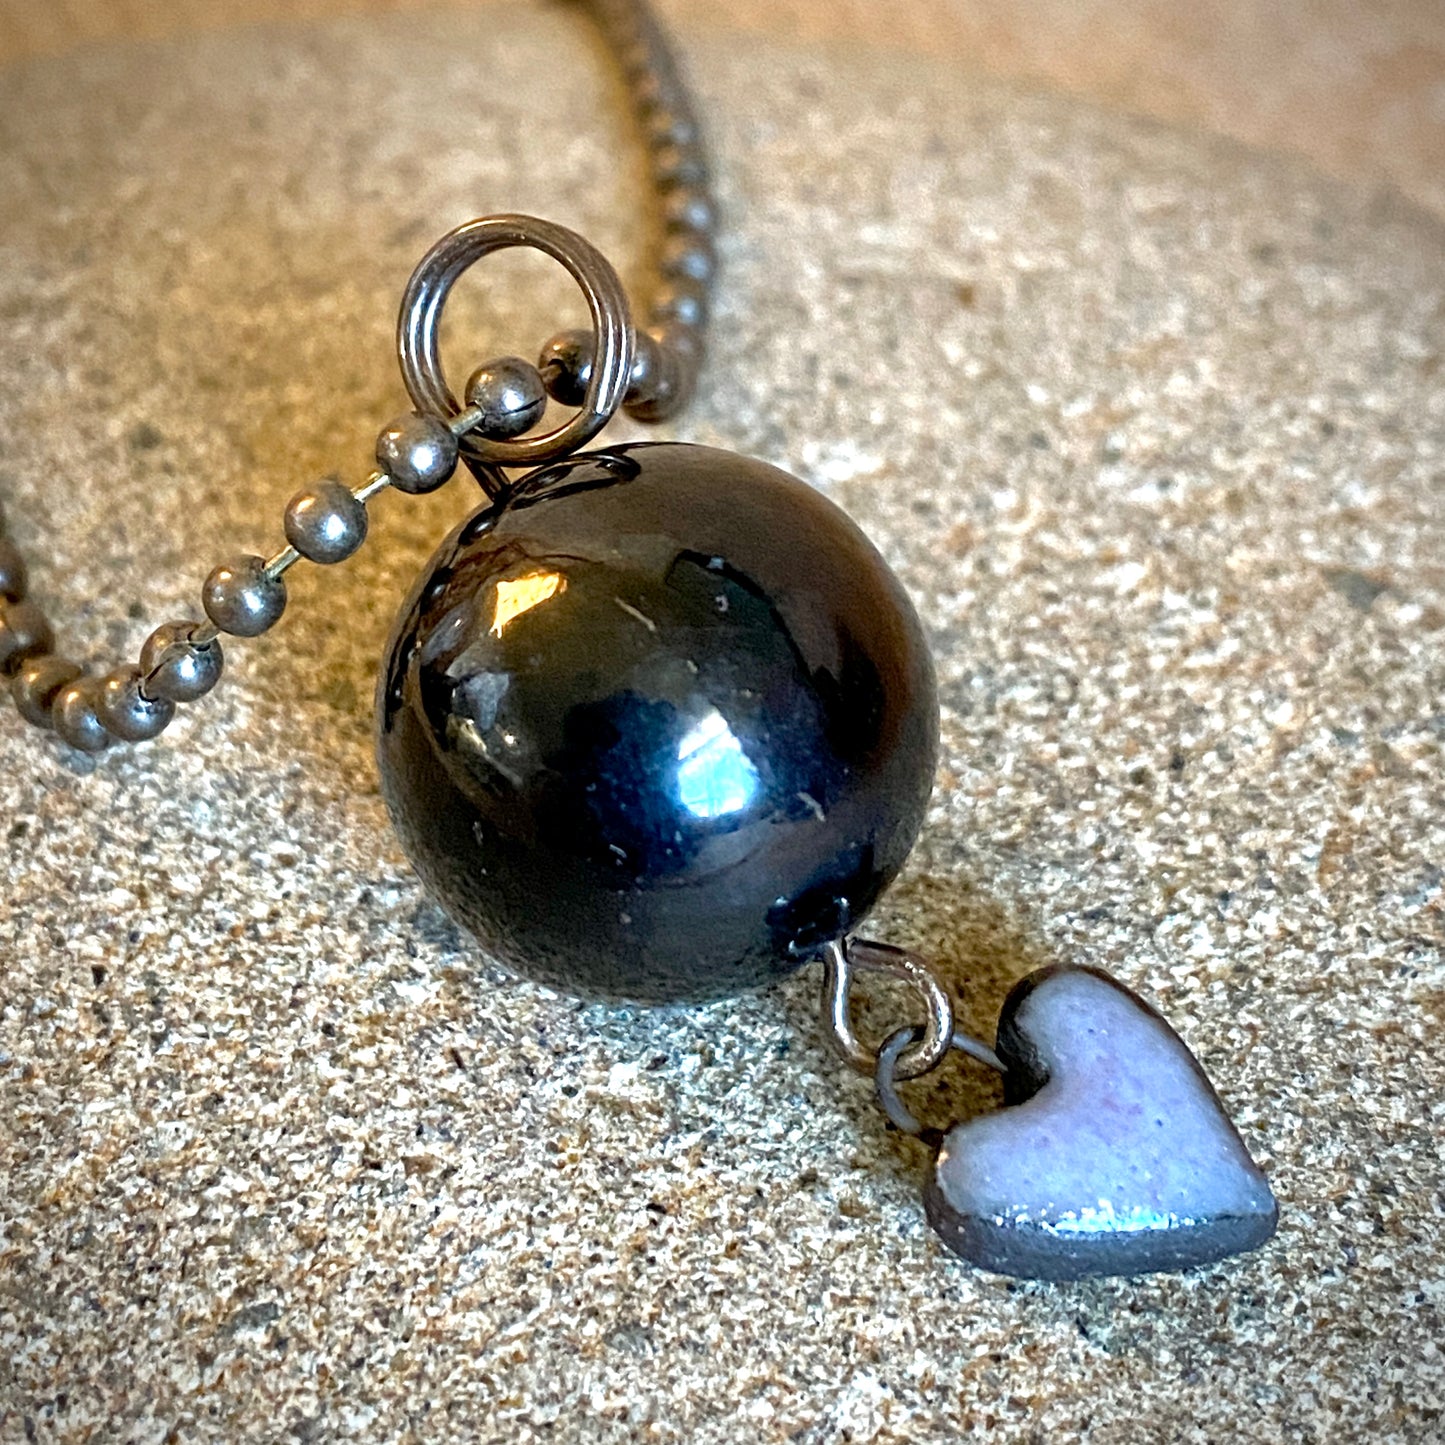 Ball & Chain Necklace, Shungite Bead, Antiqued Brass, Heart Charm